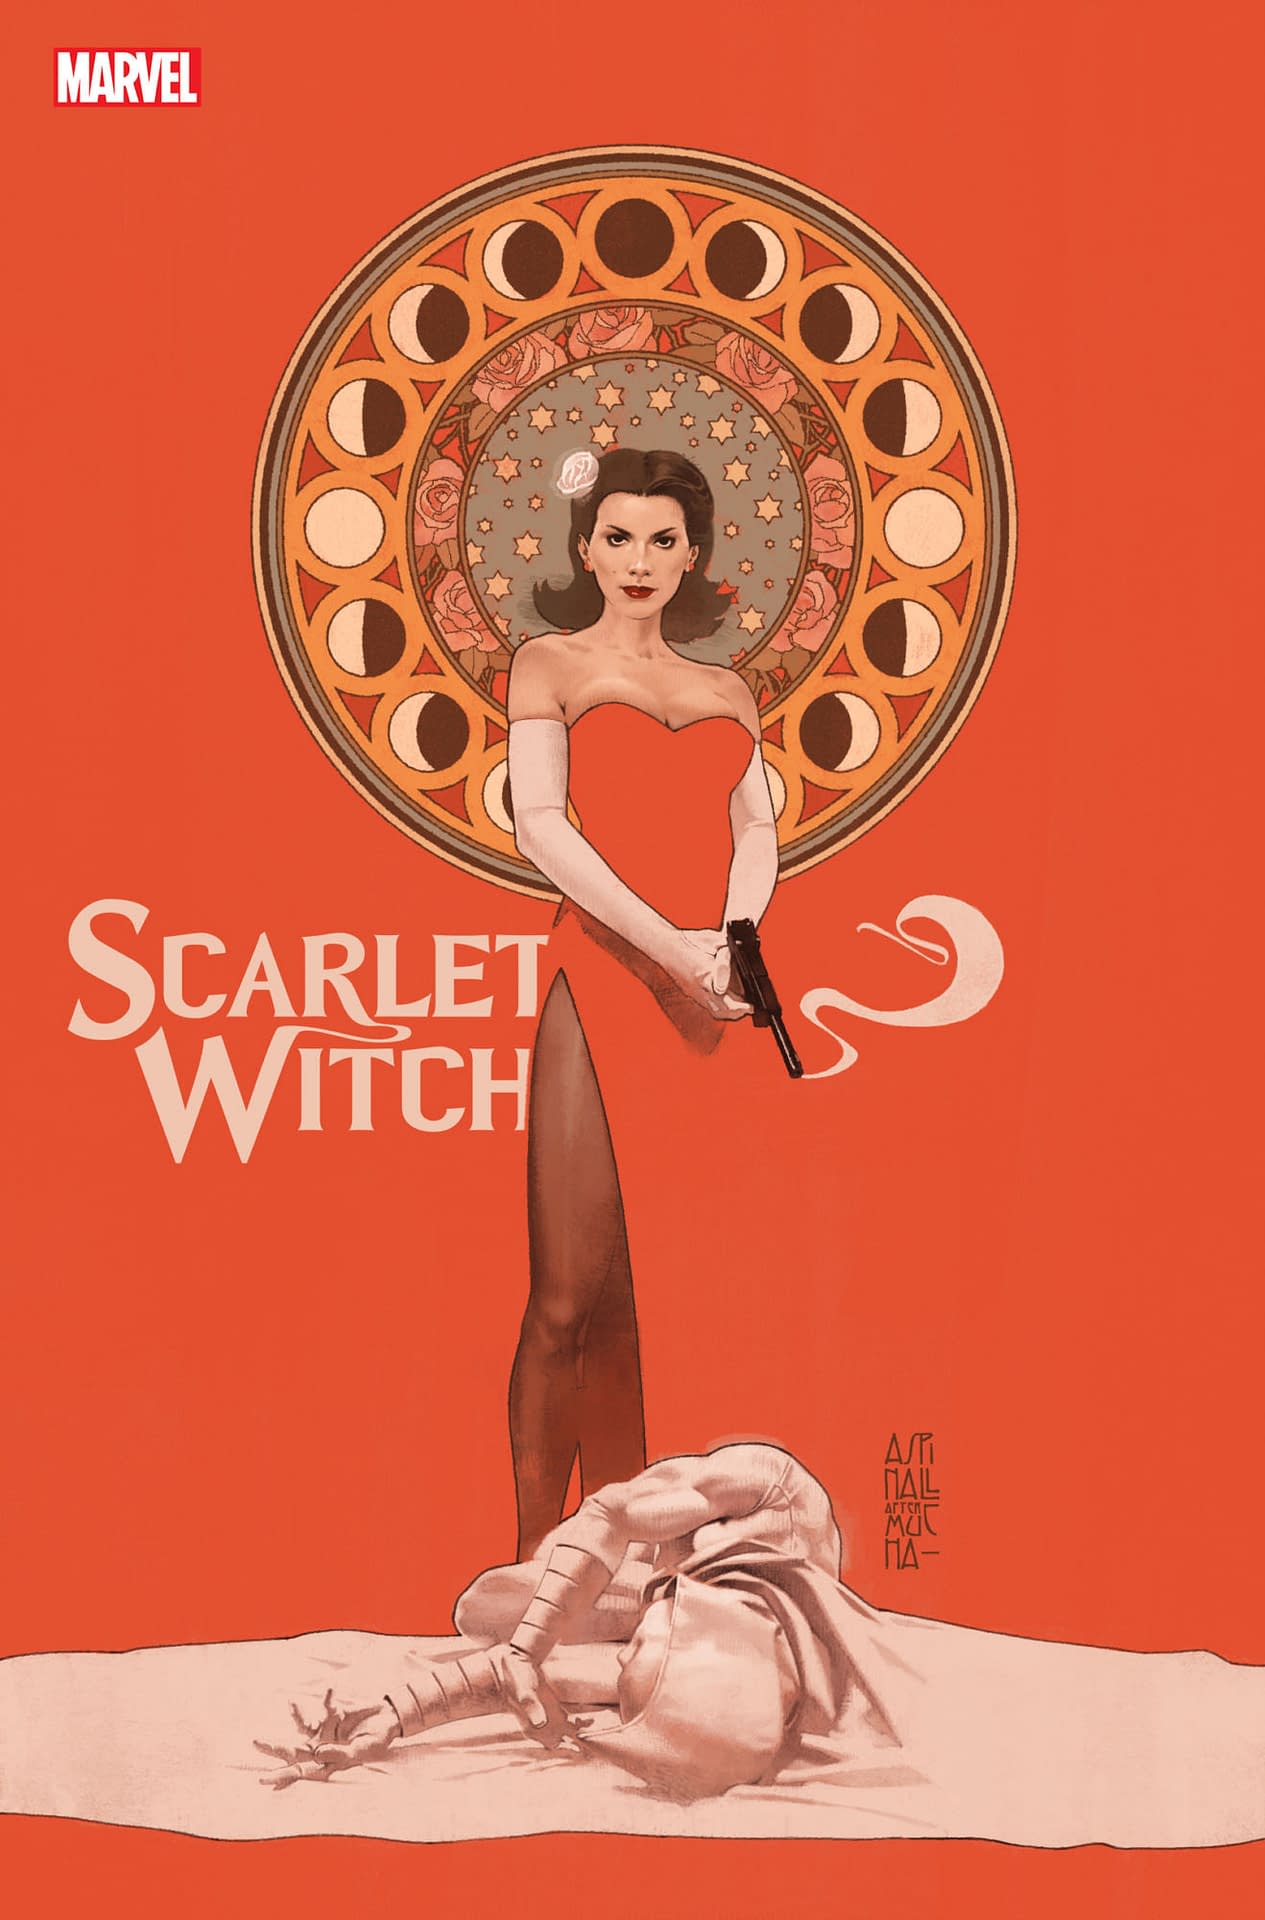 NYCC 2023: New 'Scarlet Witch & Quicksilver' Comic Series